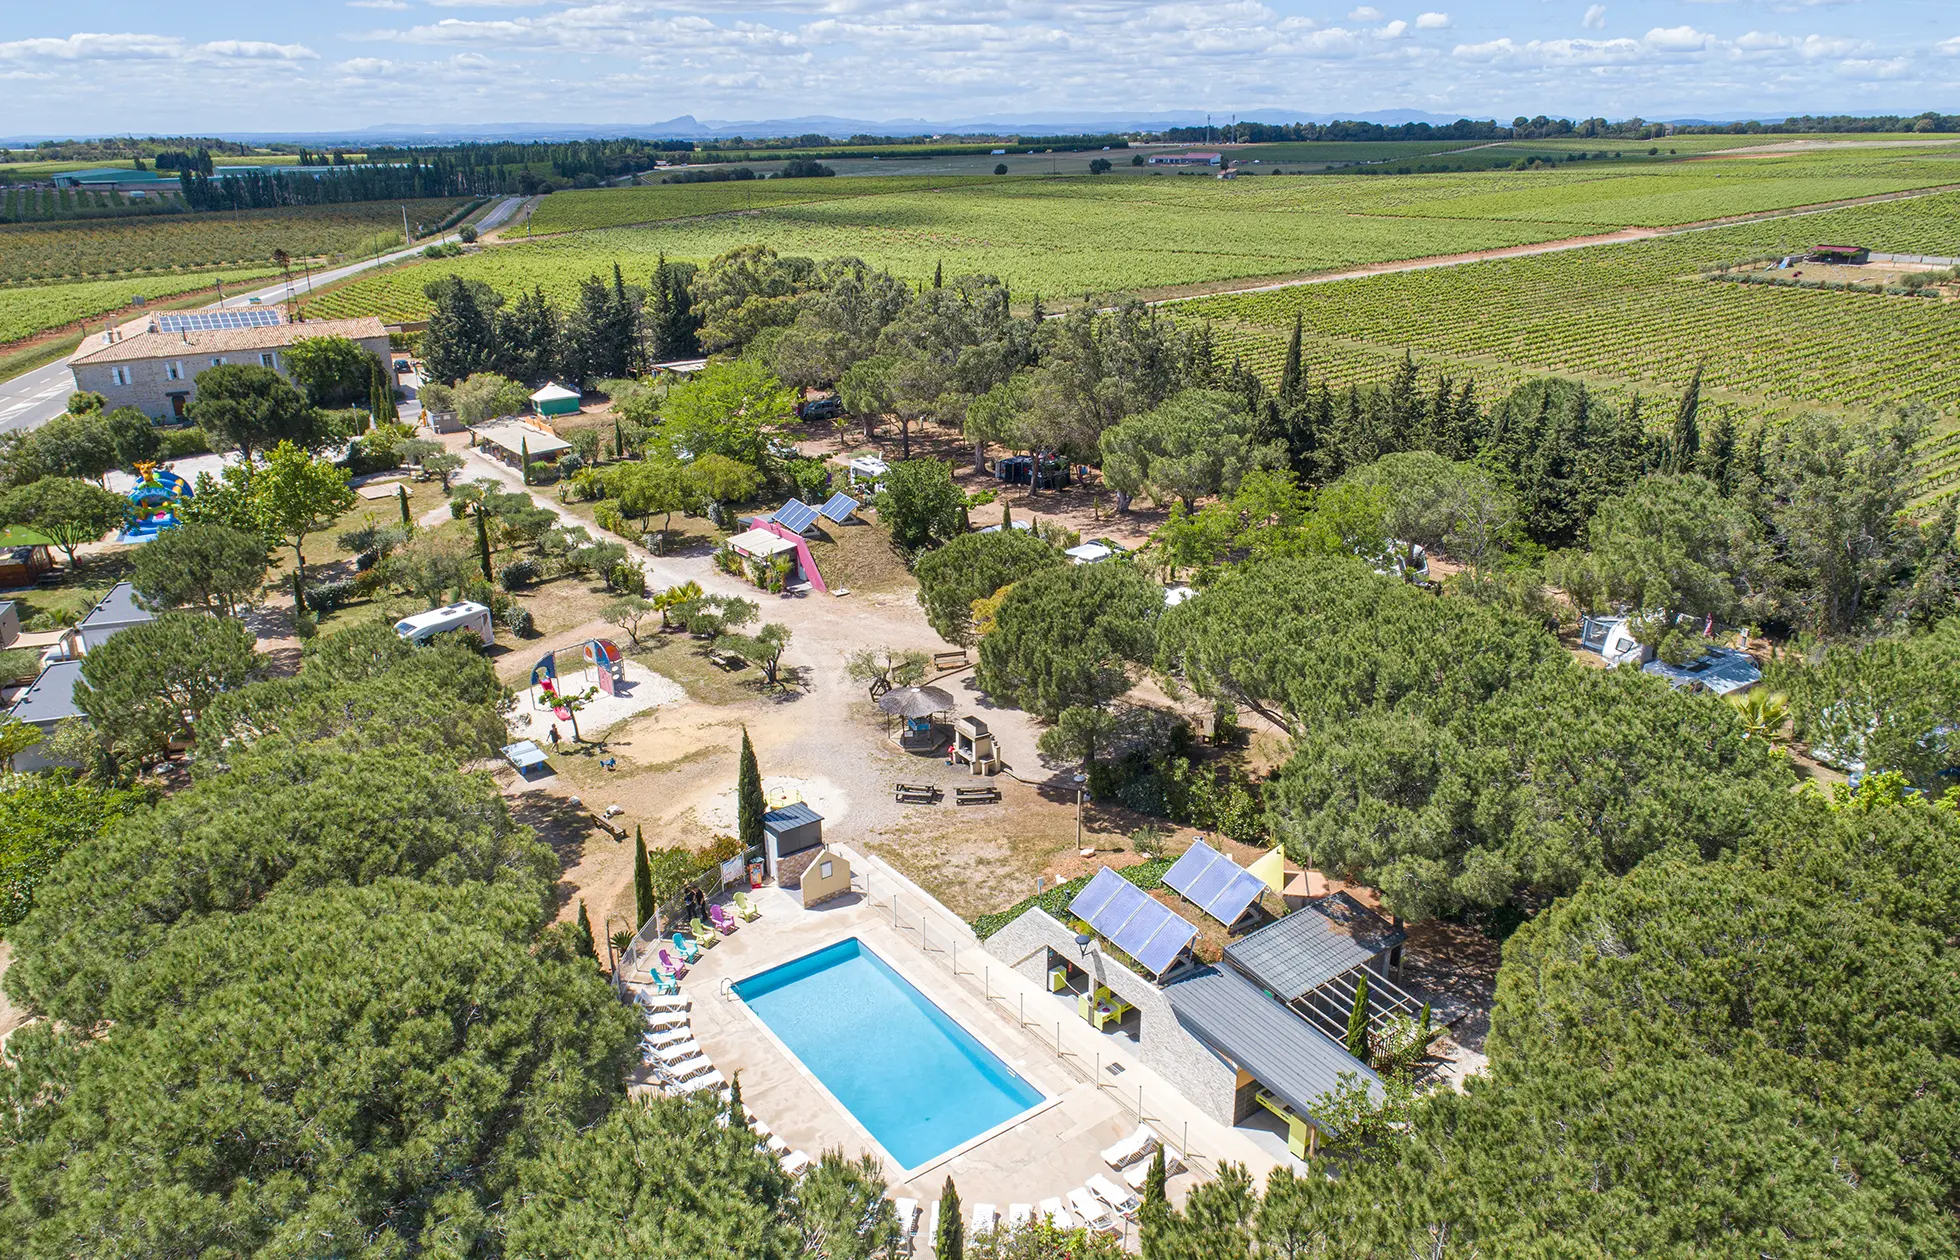 offer ' - '02 - Camping Le Mas de Mourgues - Situation